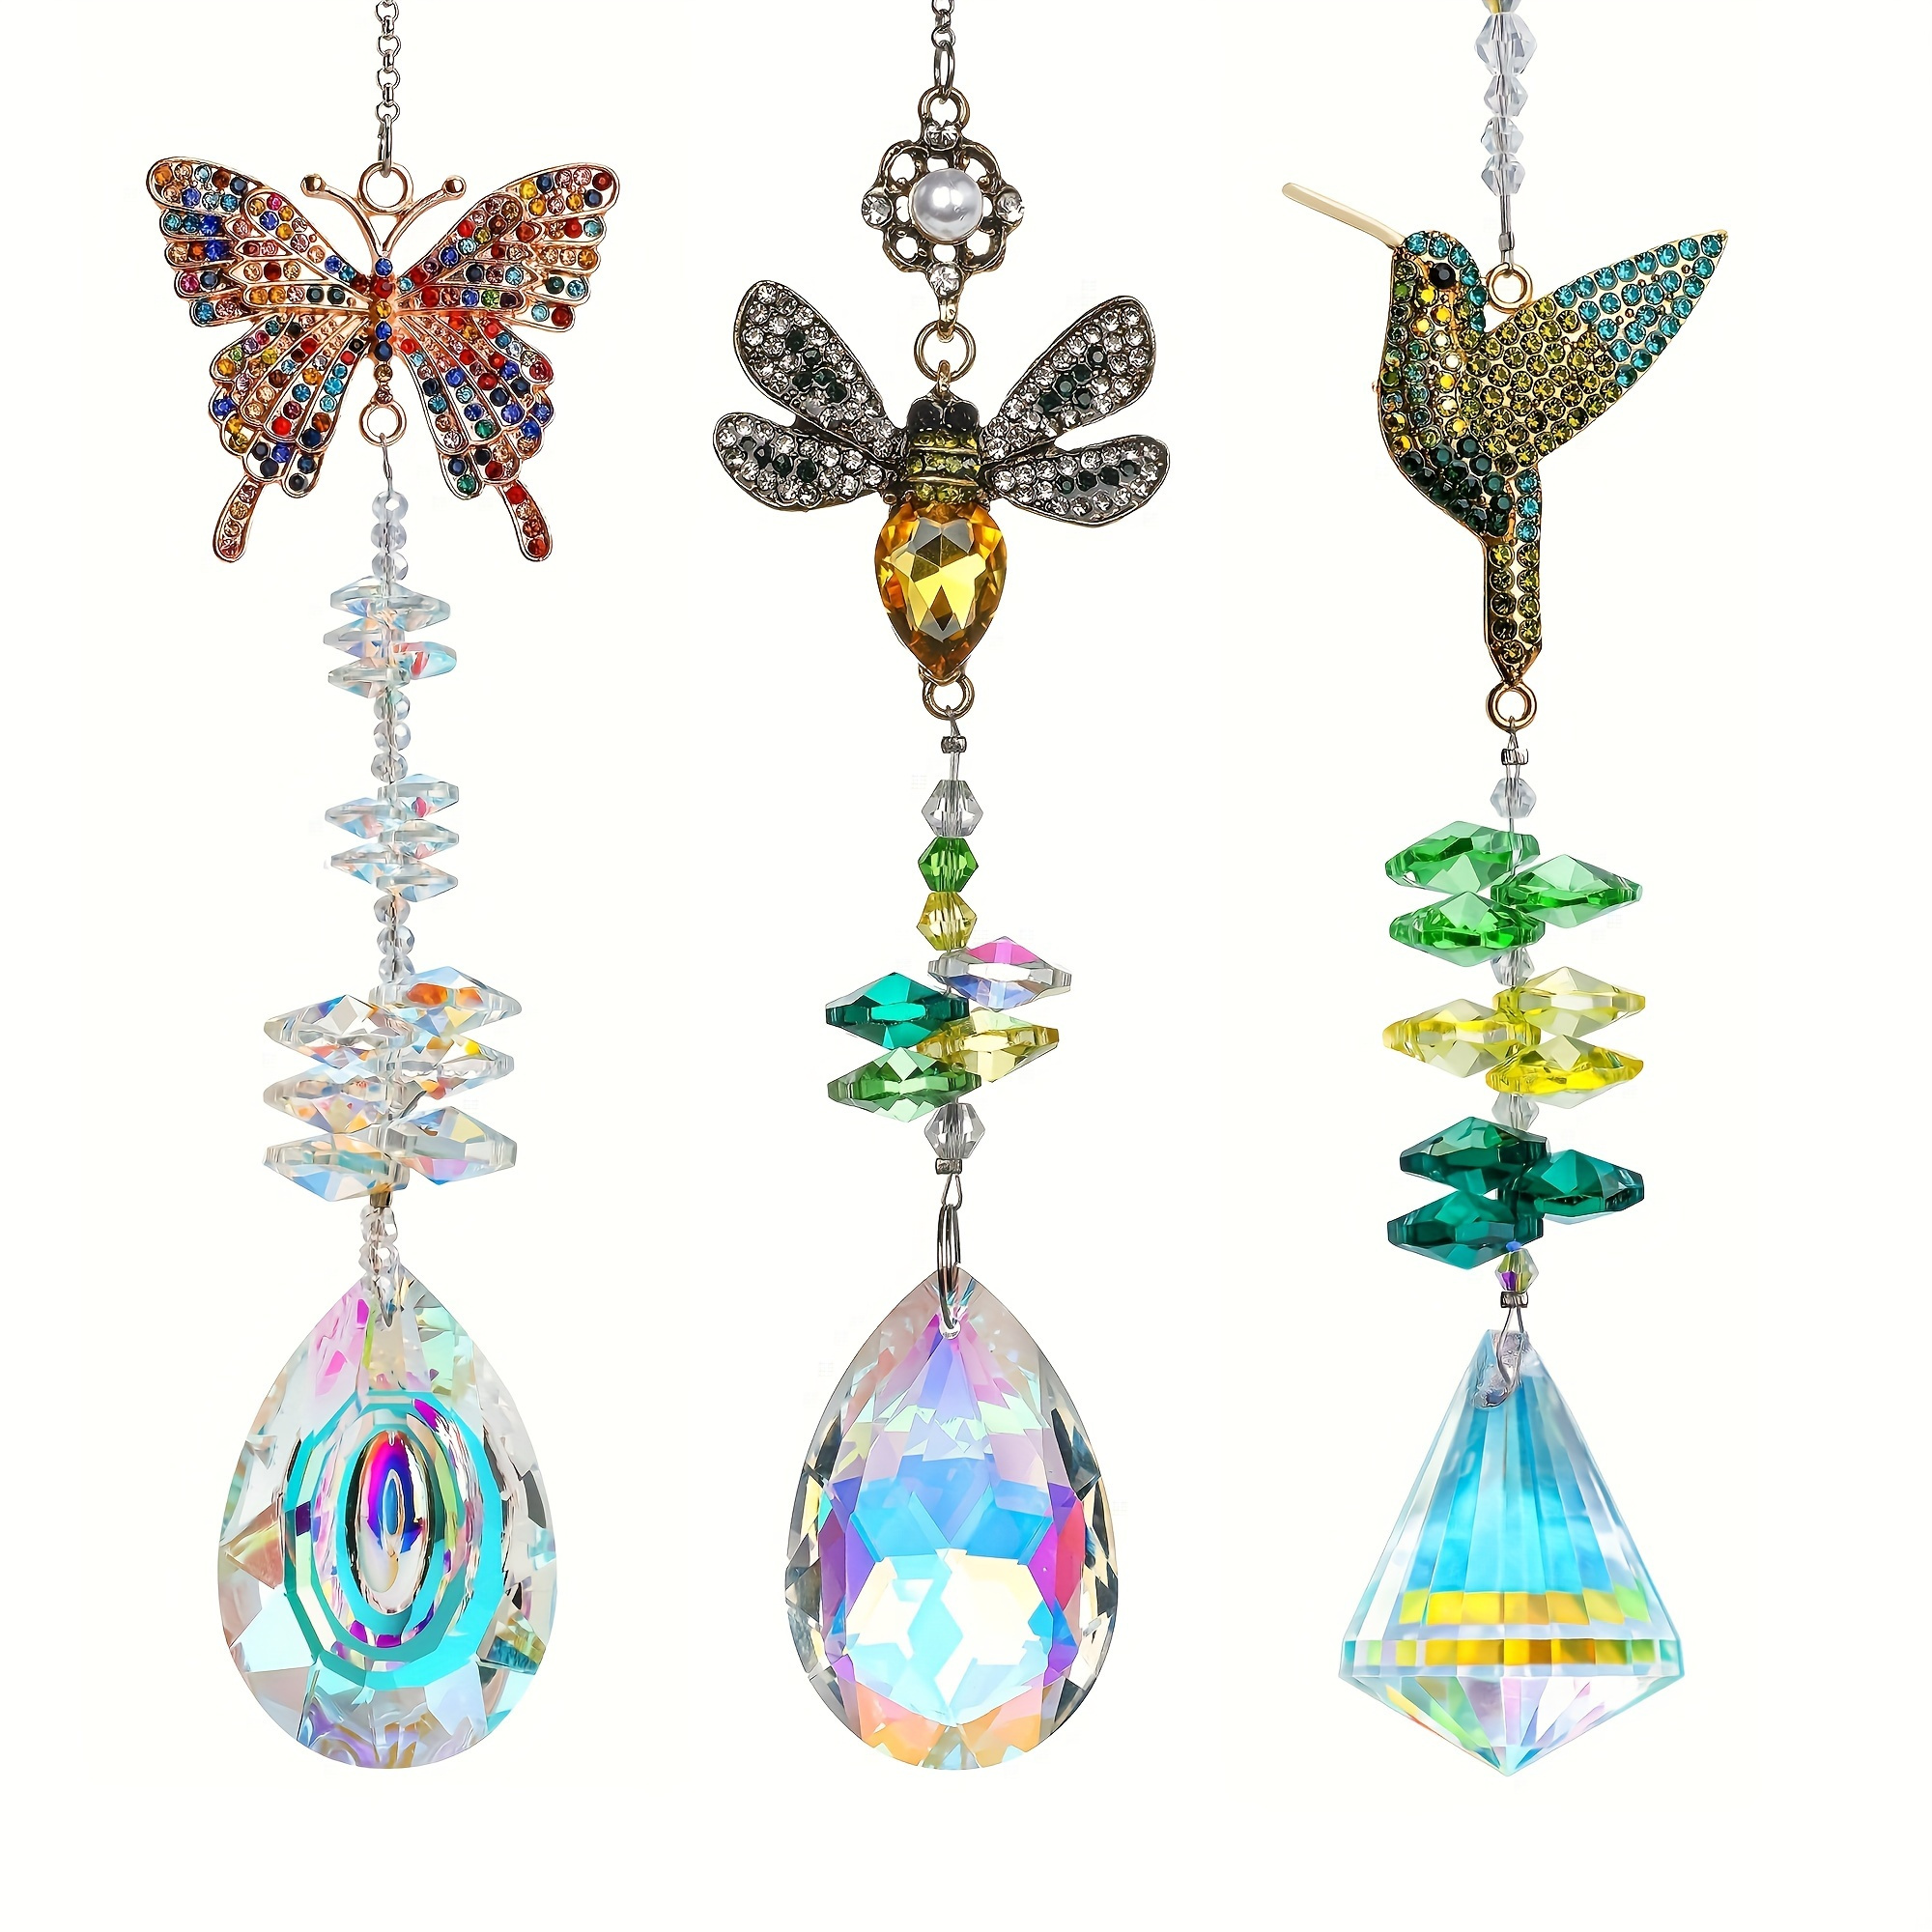 

3-piece Set K9 Crystal Sun Catchers - Colorful Prism Ornaments With Hummingbird, Bee & Butterfly Designs For Home Decor And Weddings